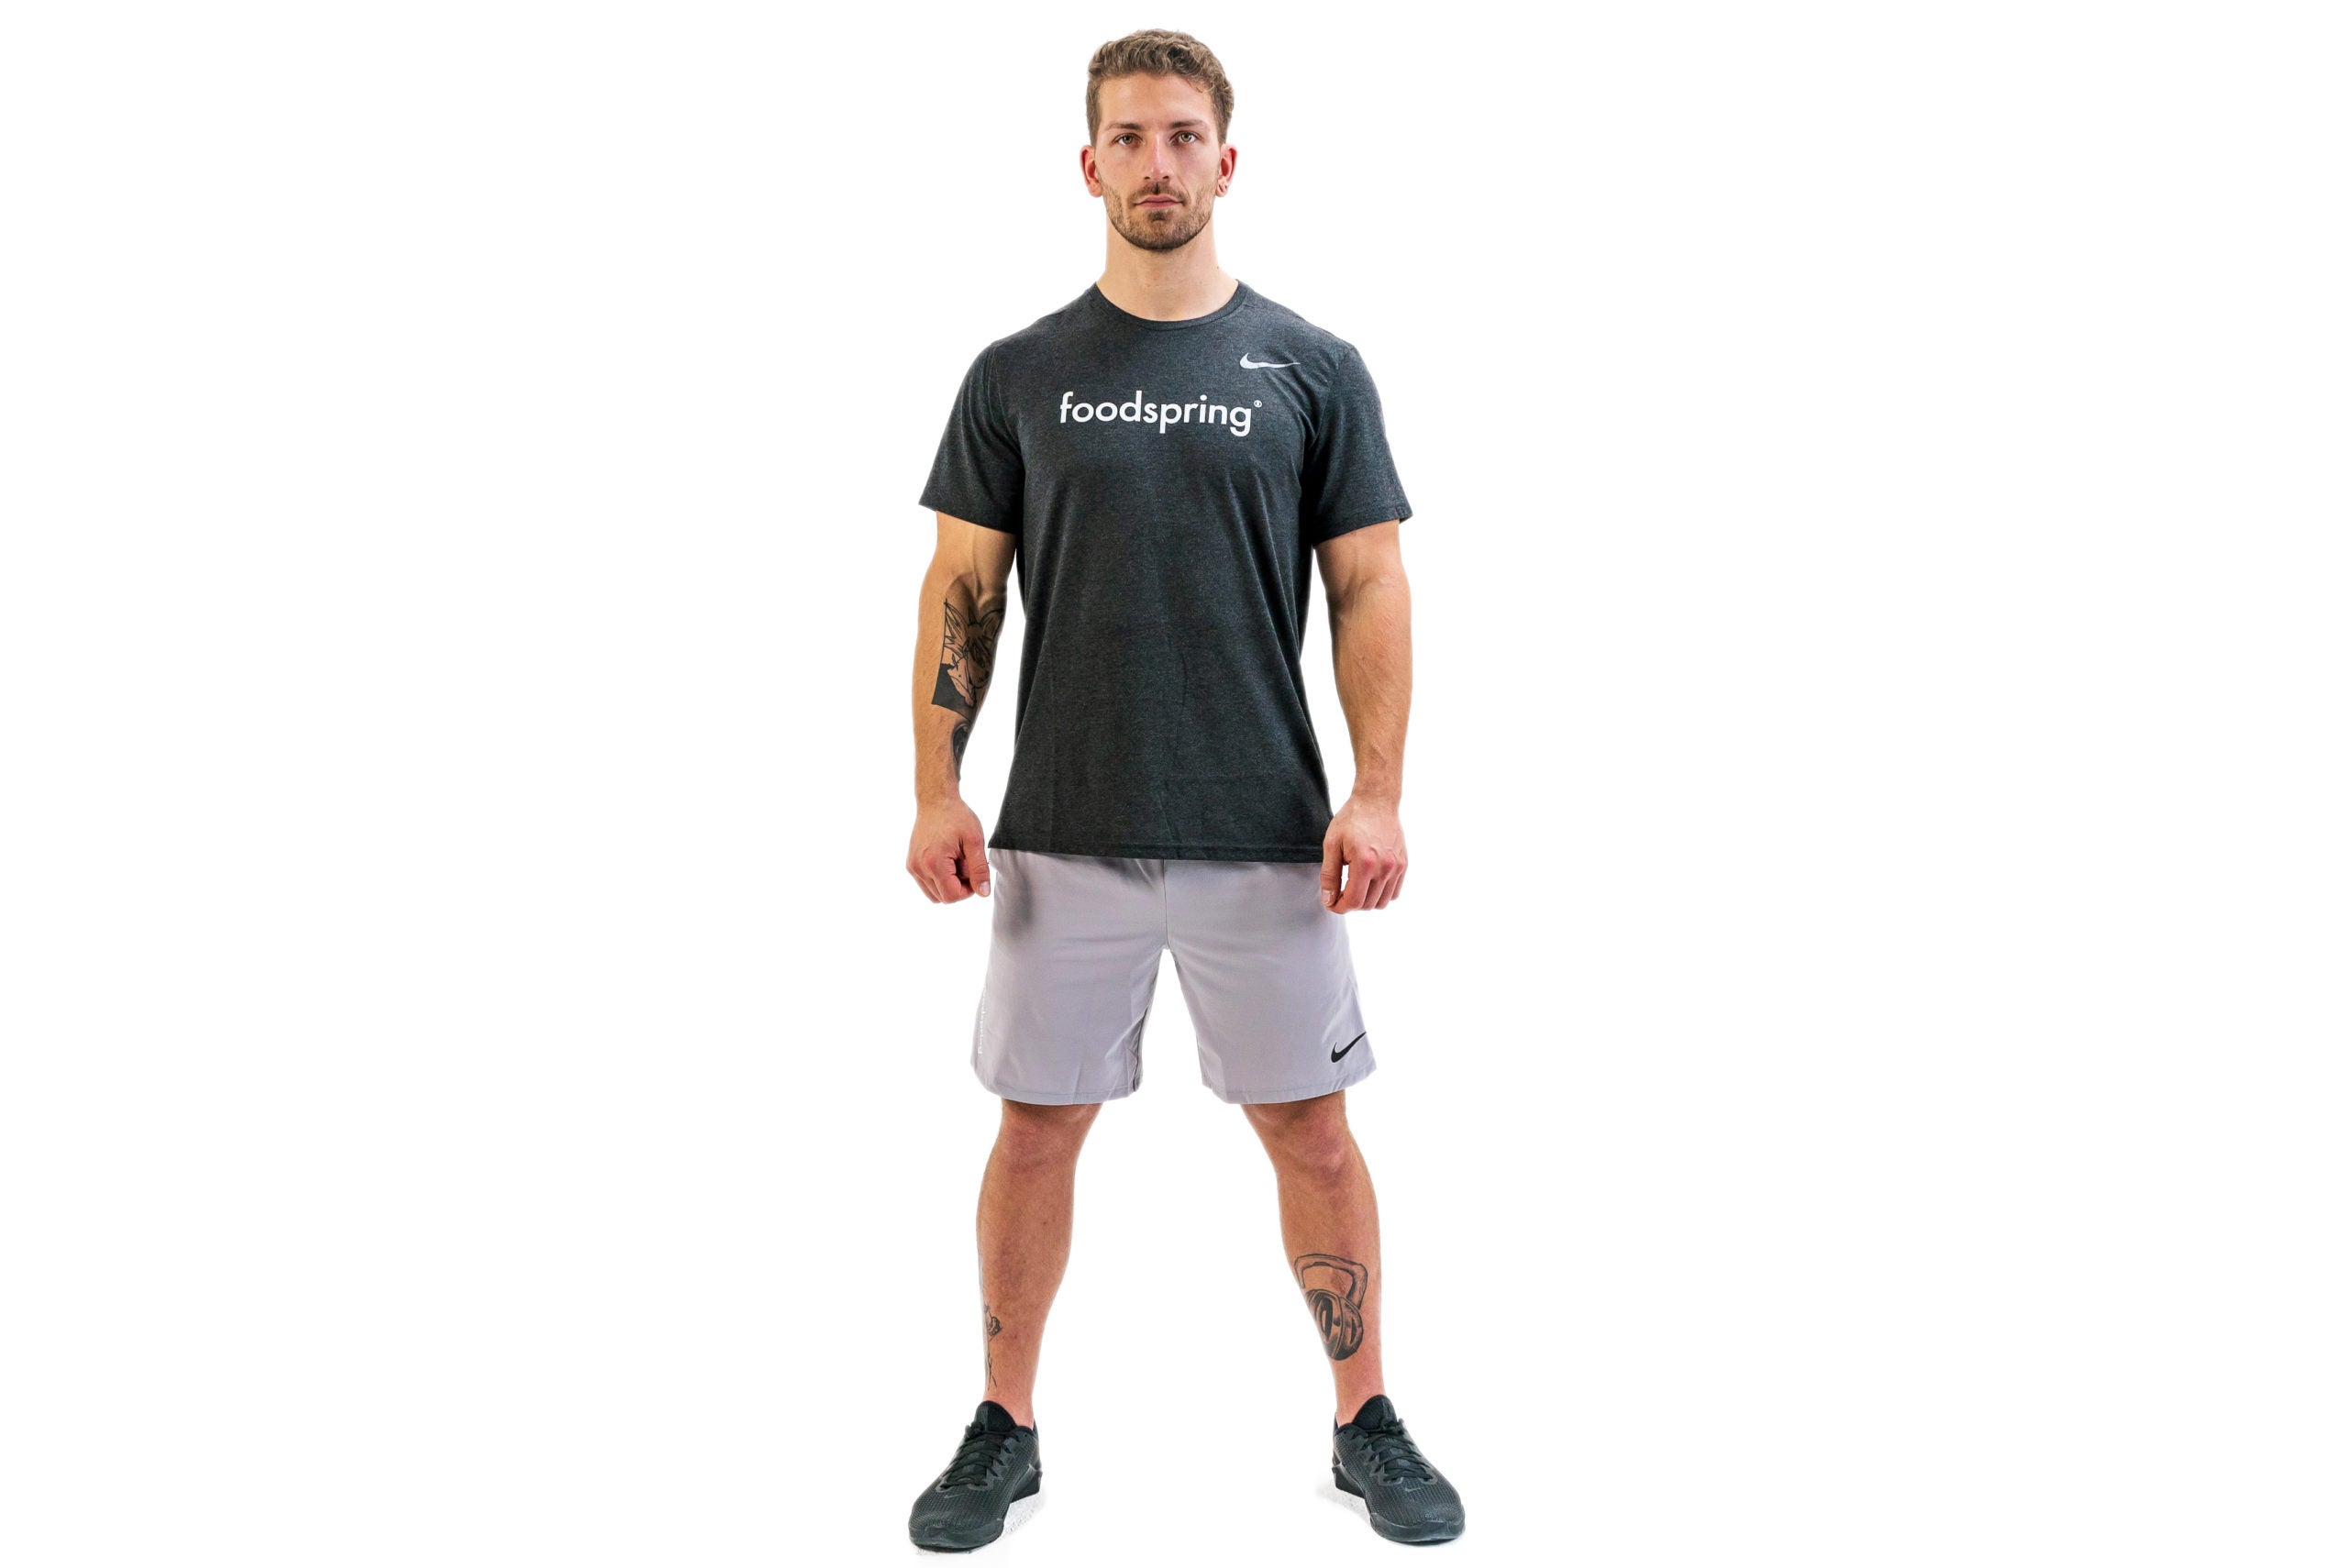 A tattooed white man in a black foodspring t-shirt and gray gym shorts shows the starting position for air squats. He is standing with his back straight, arms at his sides and feet shoulder-width apart.